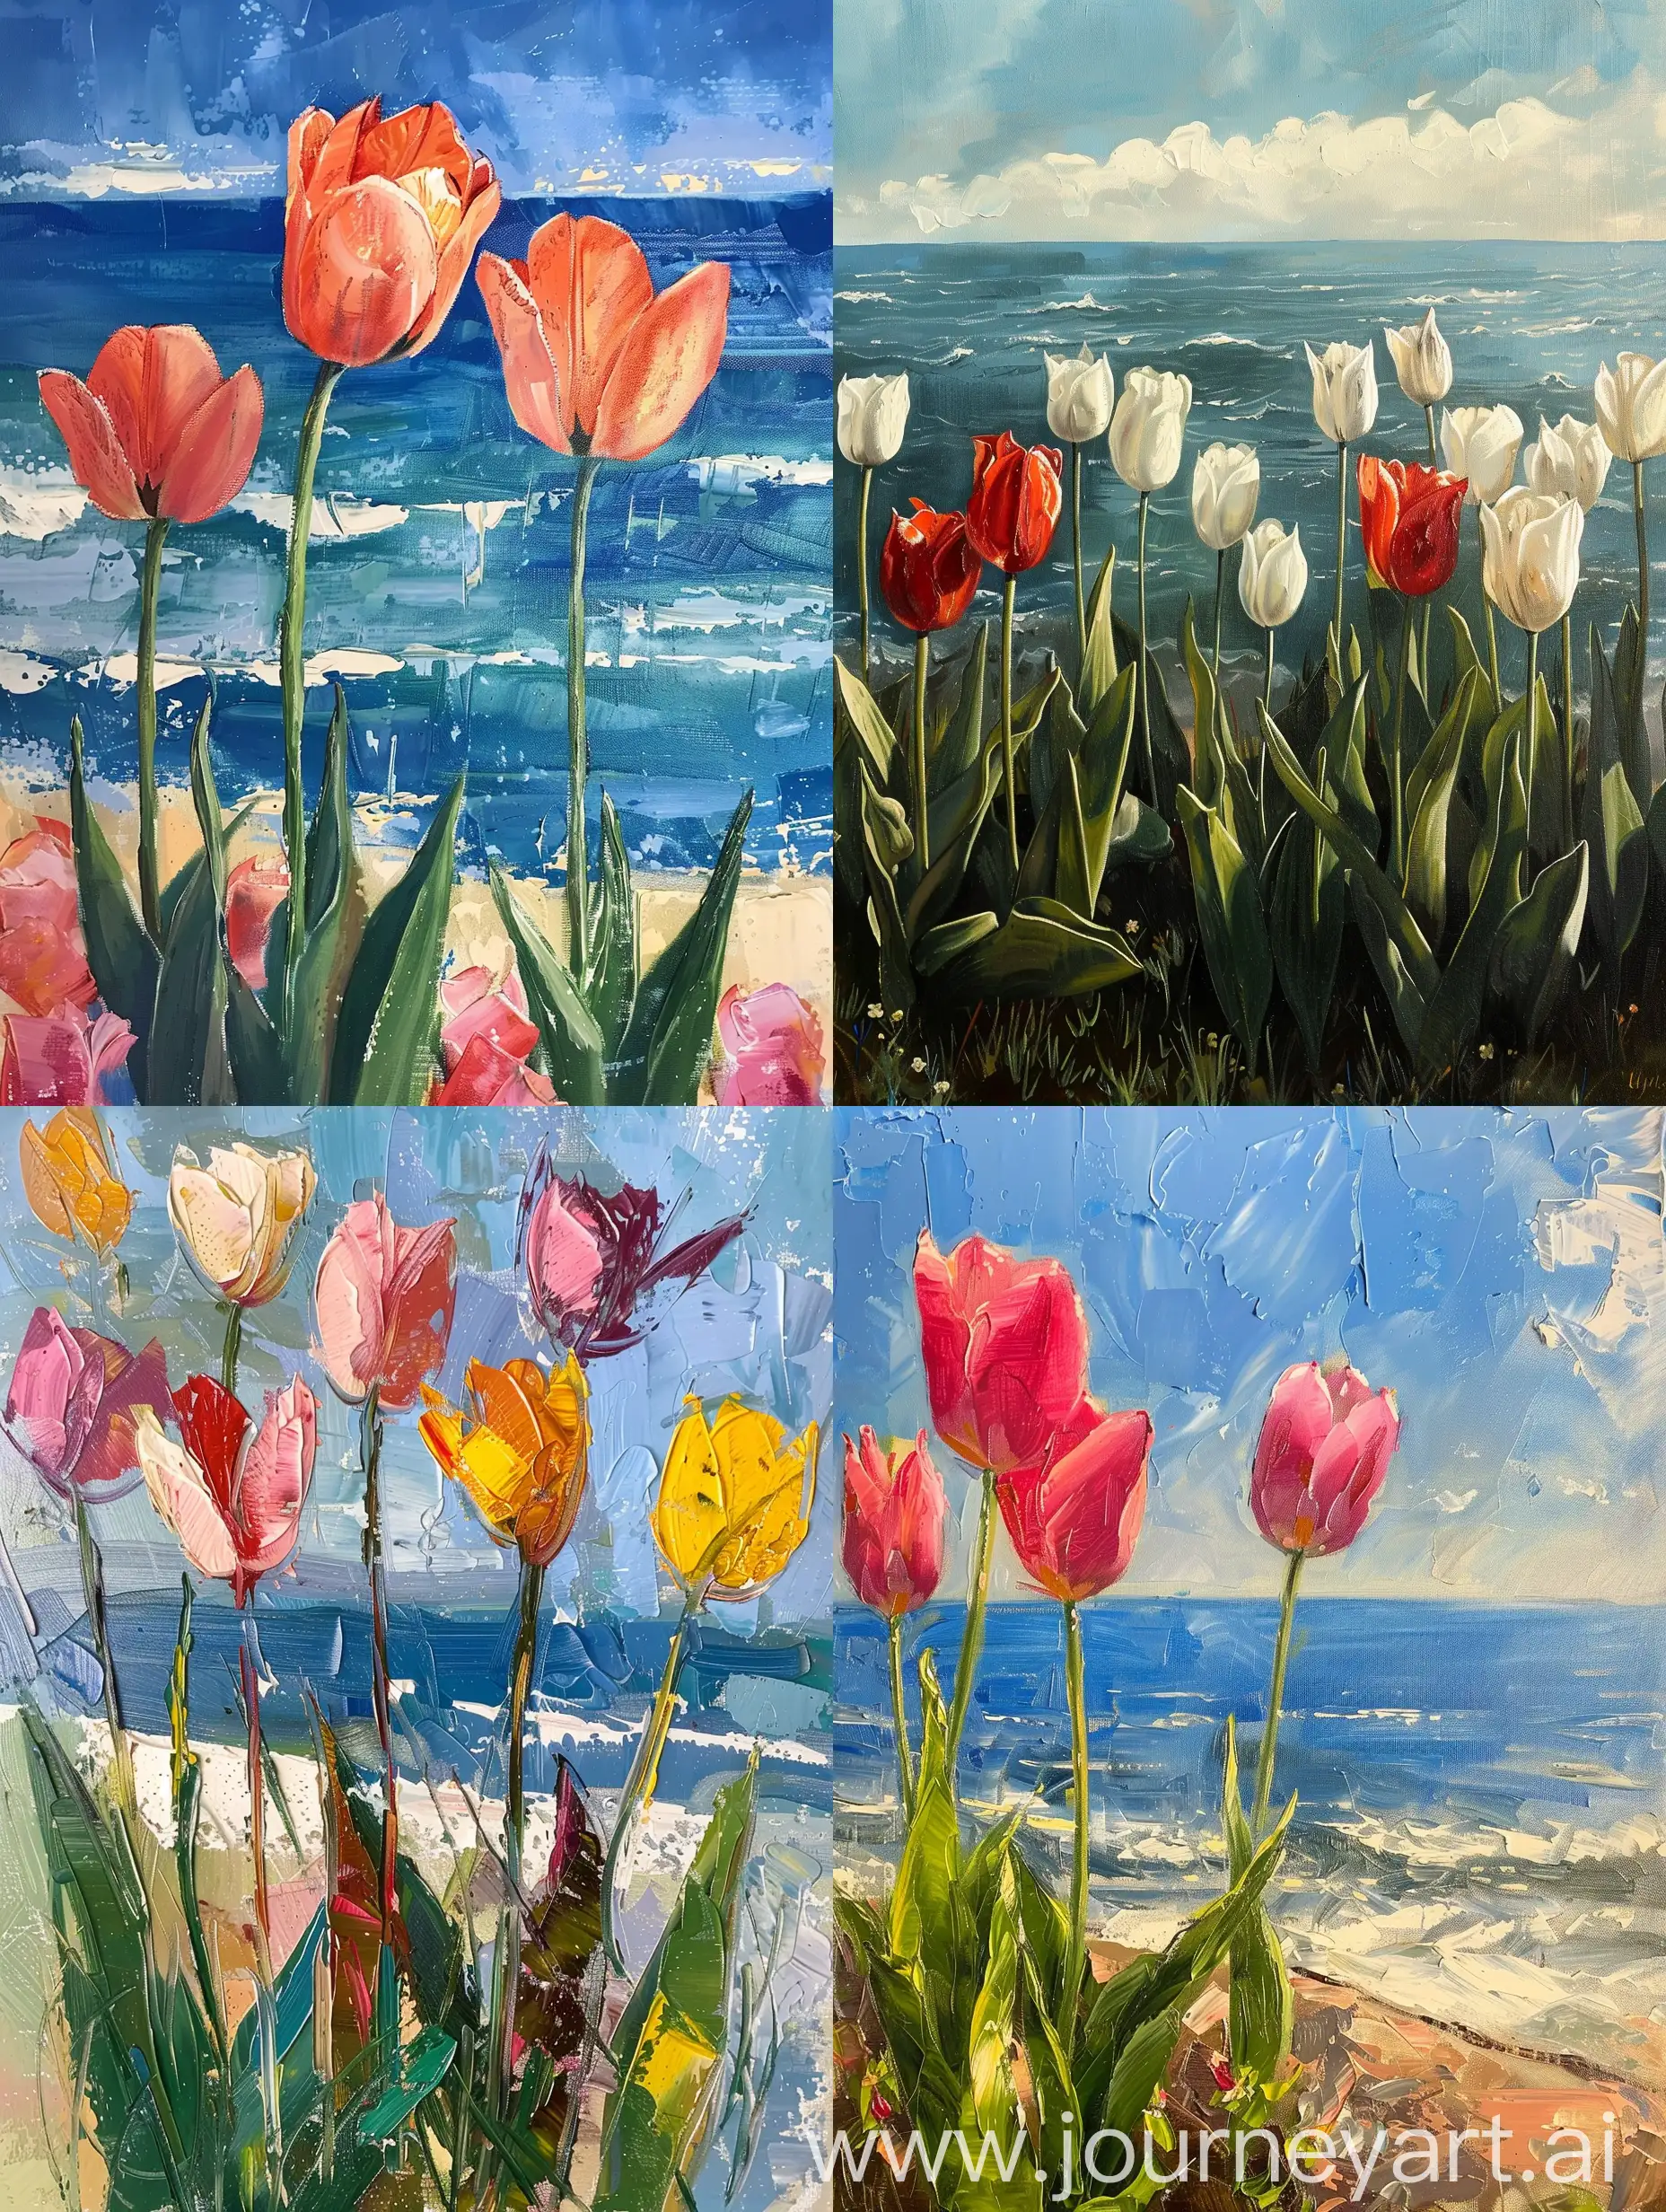 Vibrant-Oil-Painting-of-a-Tulip-Sea-in-34-Aspect-Ratio